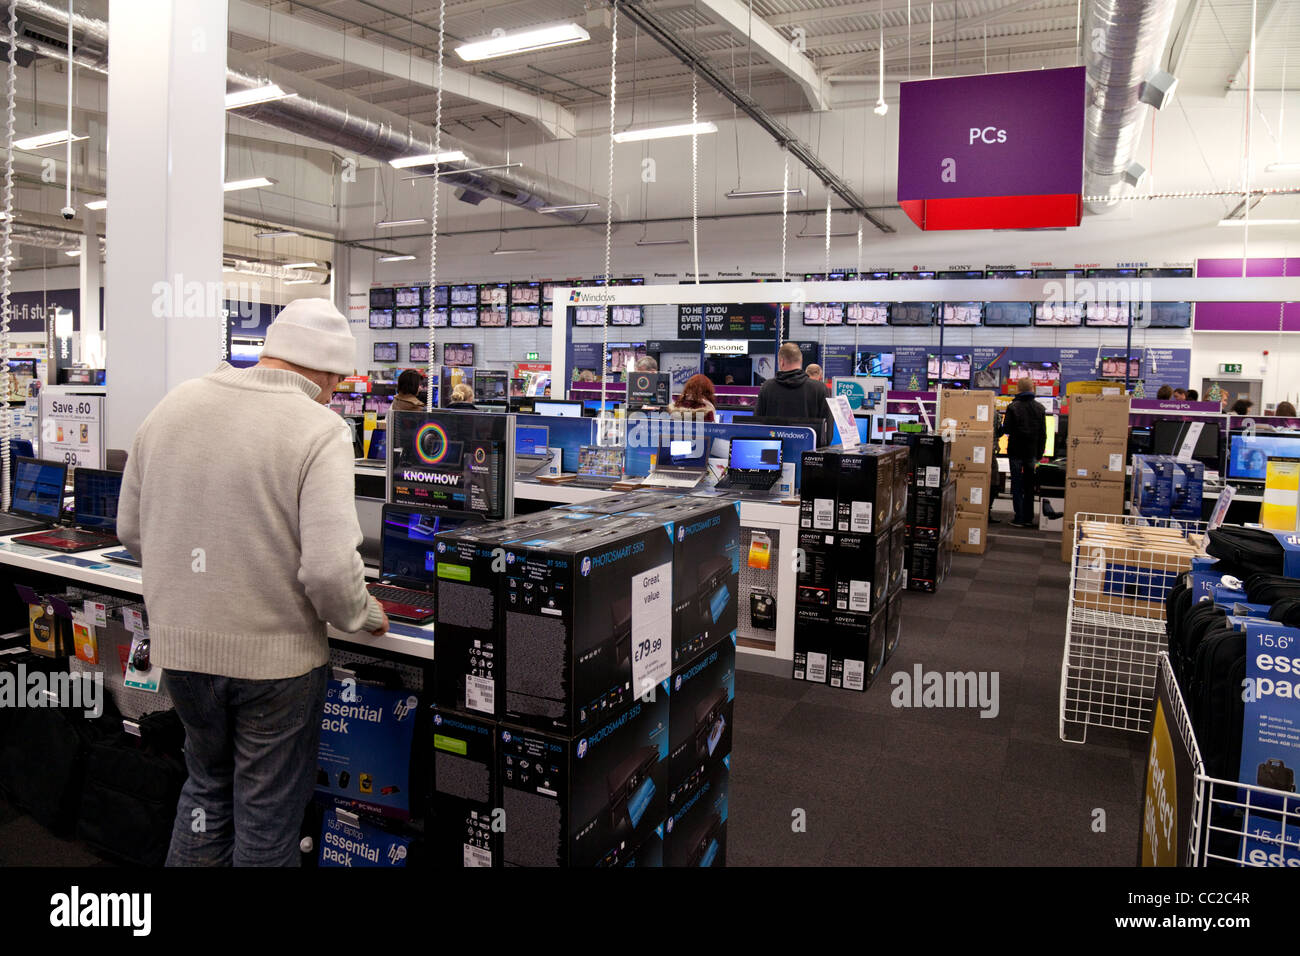 Computers for Sale in a Computer Store Editorial Image - Image of computer,  computers: 135429635